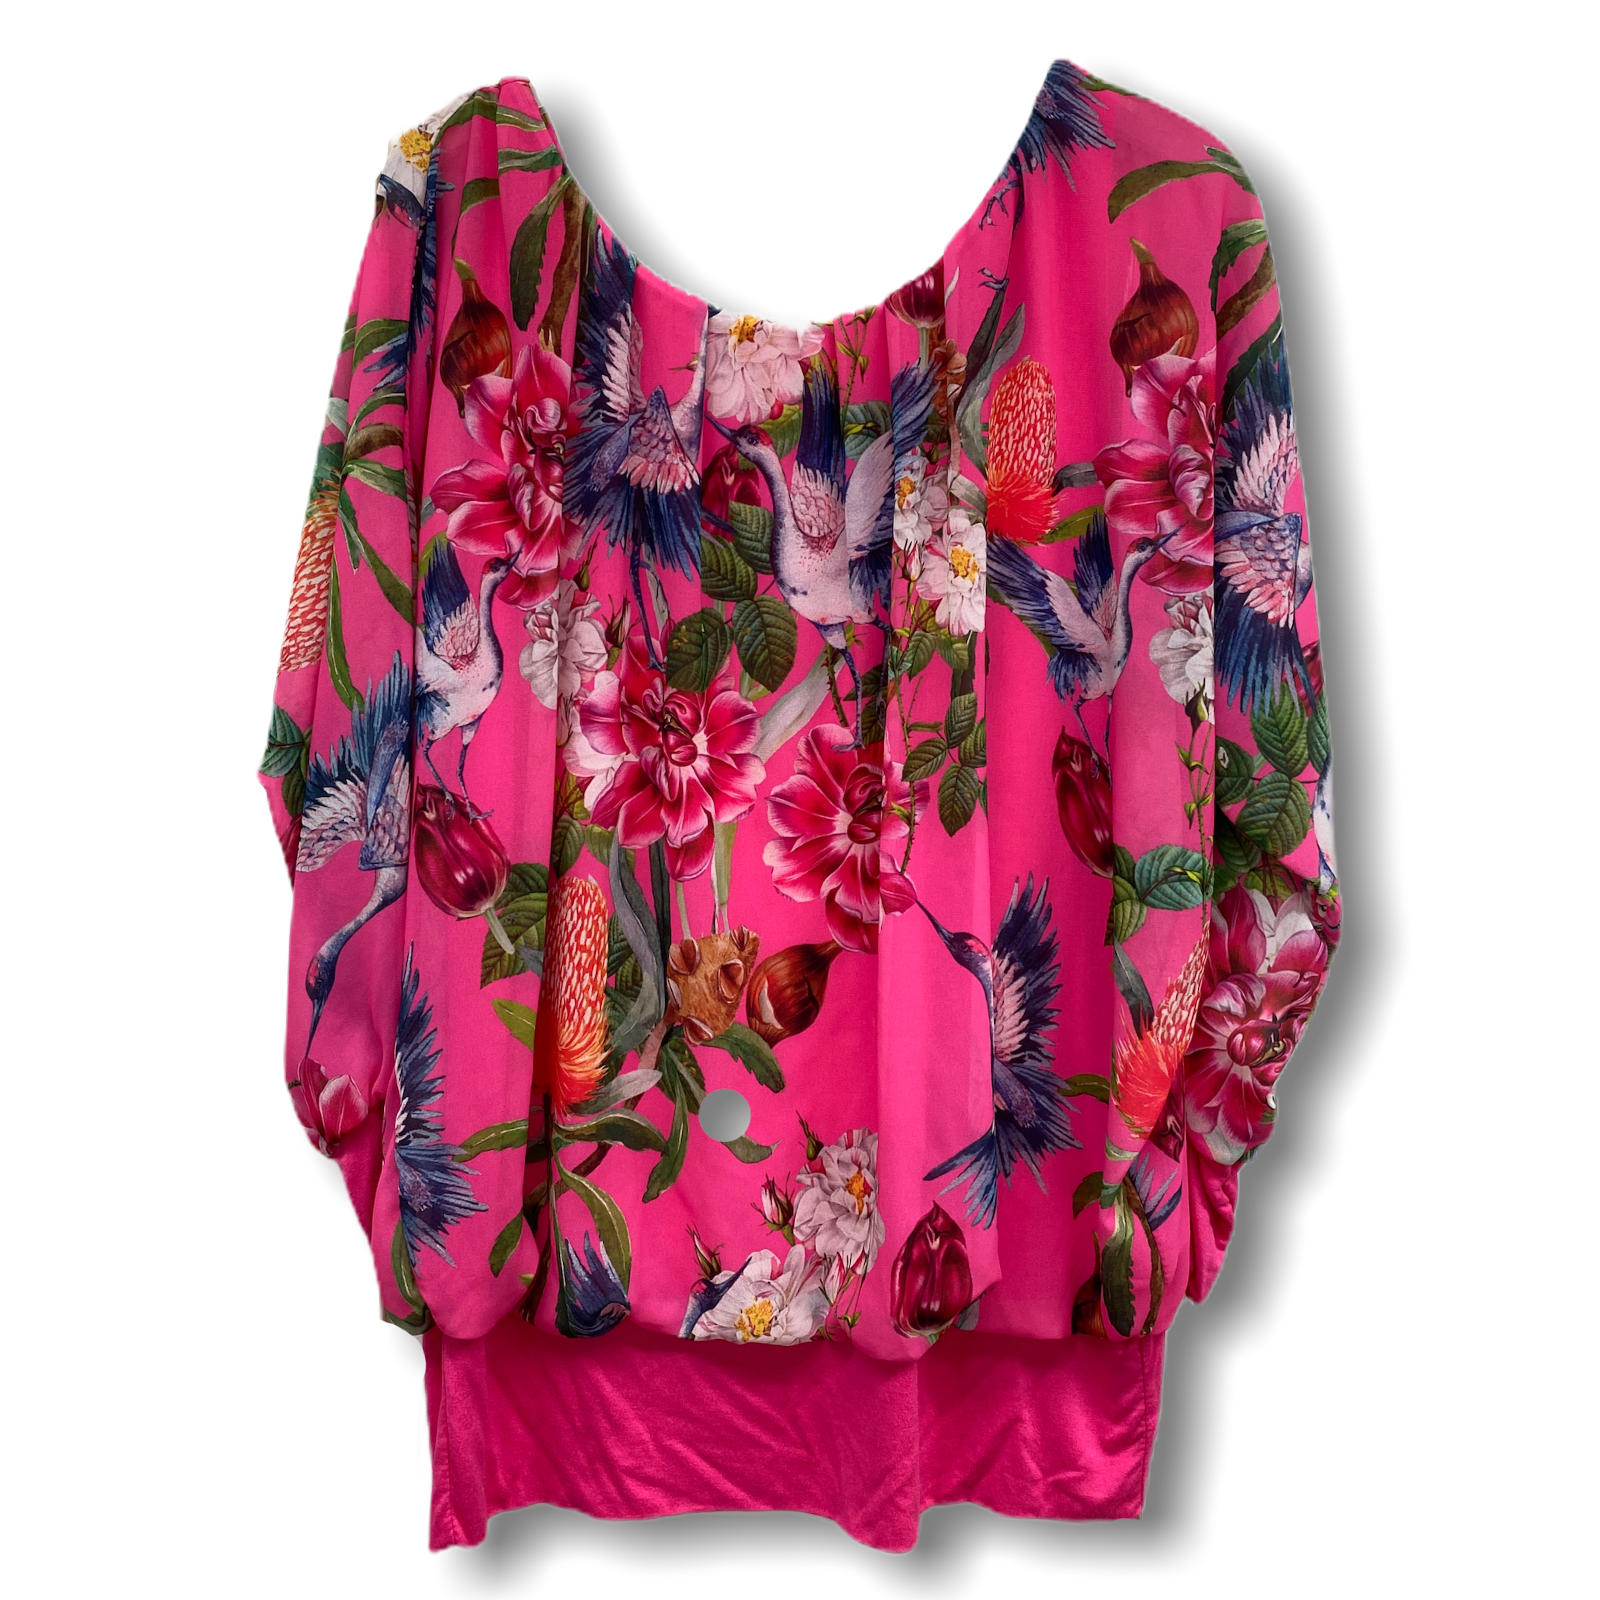 Bluse "Flowers" pink